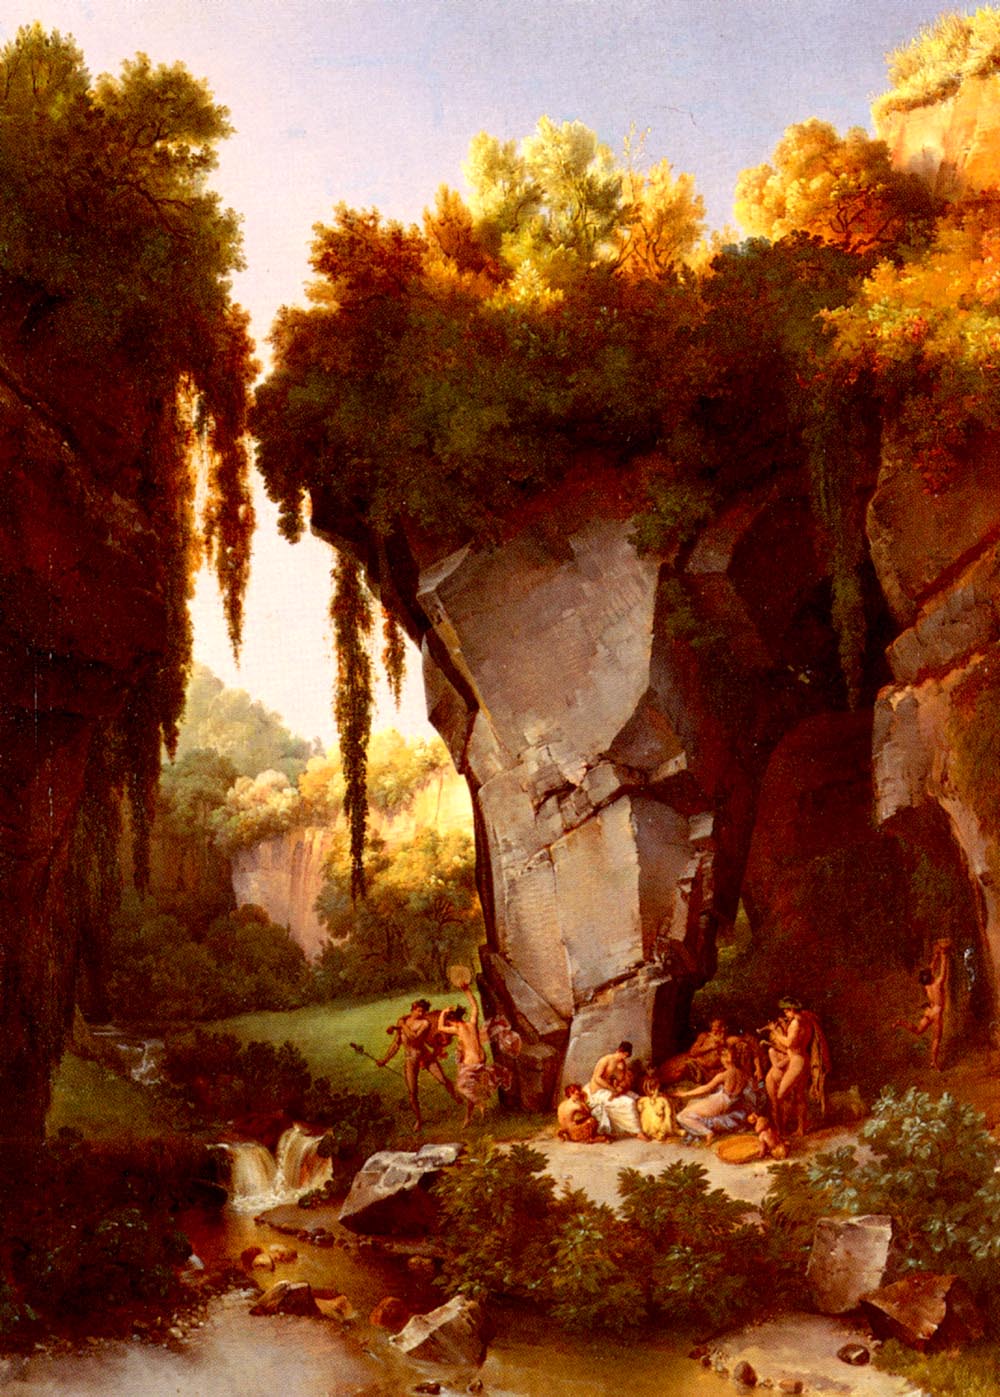 Craggy Landscrape With Bacchanal by Lancelot Theodore Turpin